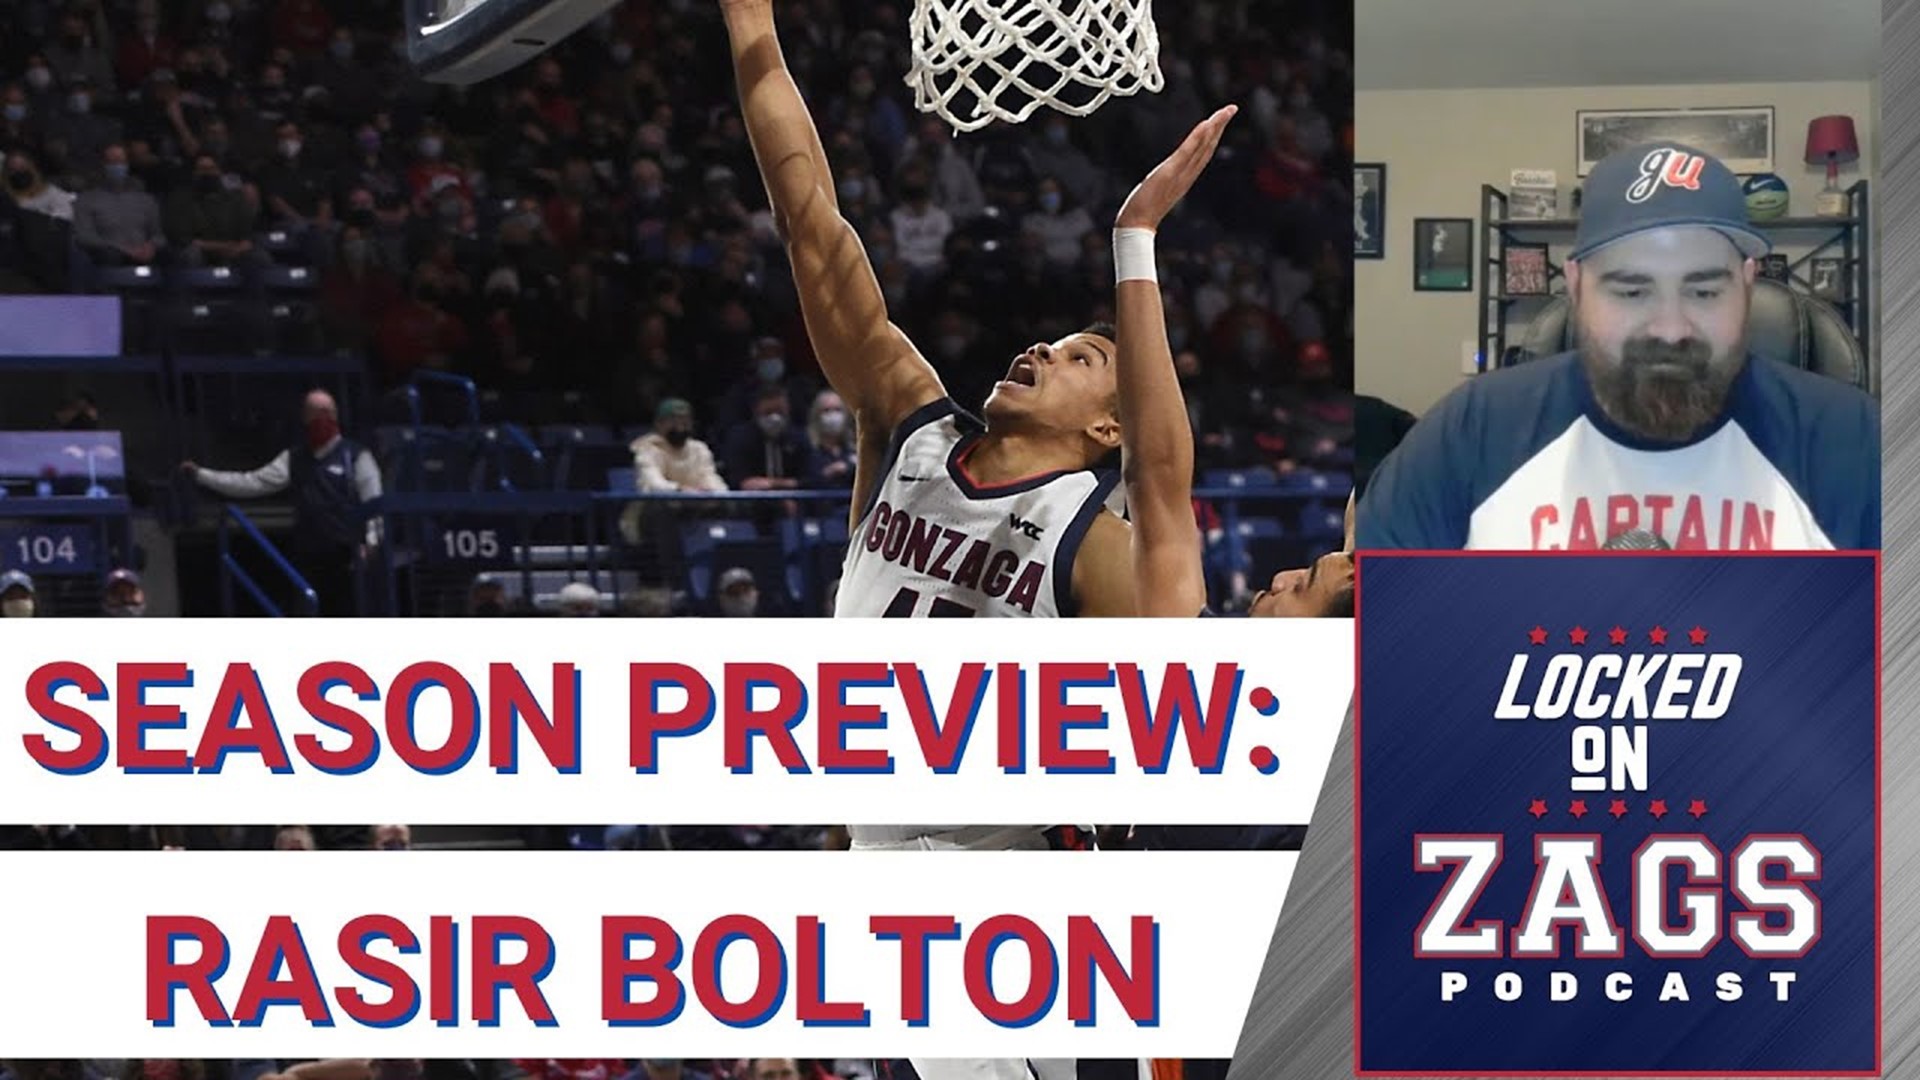 The elder statesman of the Zags is Rasir Bolton, who grad transferred to Gonzaga last year but will use his final year of eligibility for one more go-round.